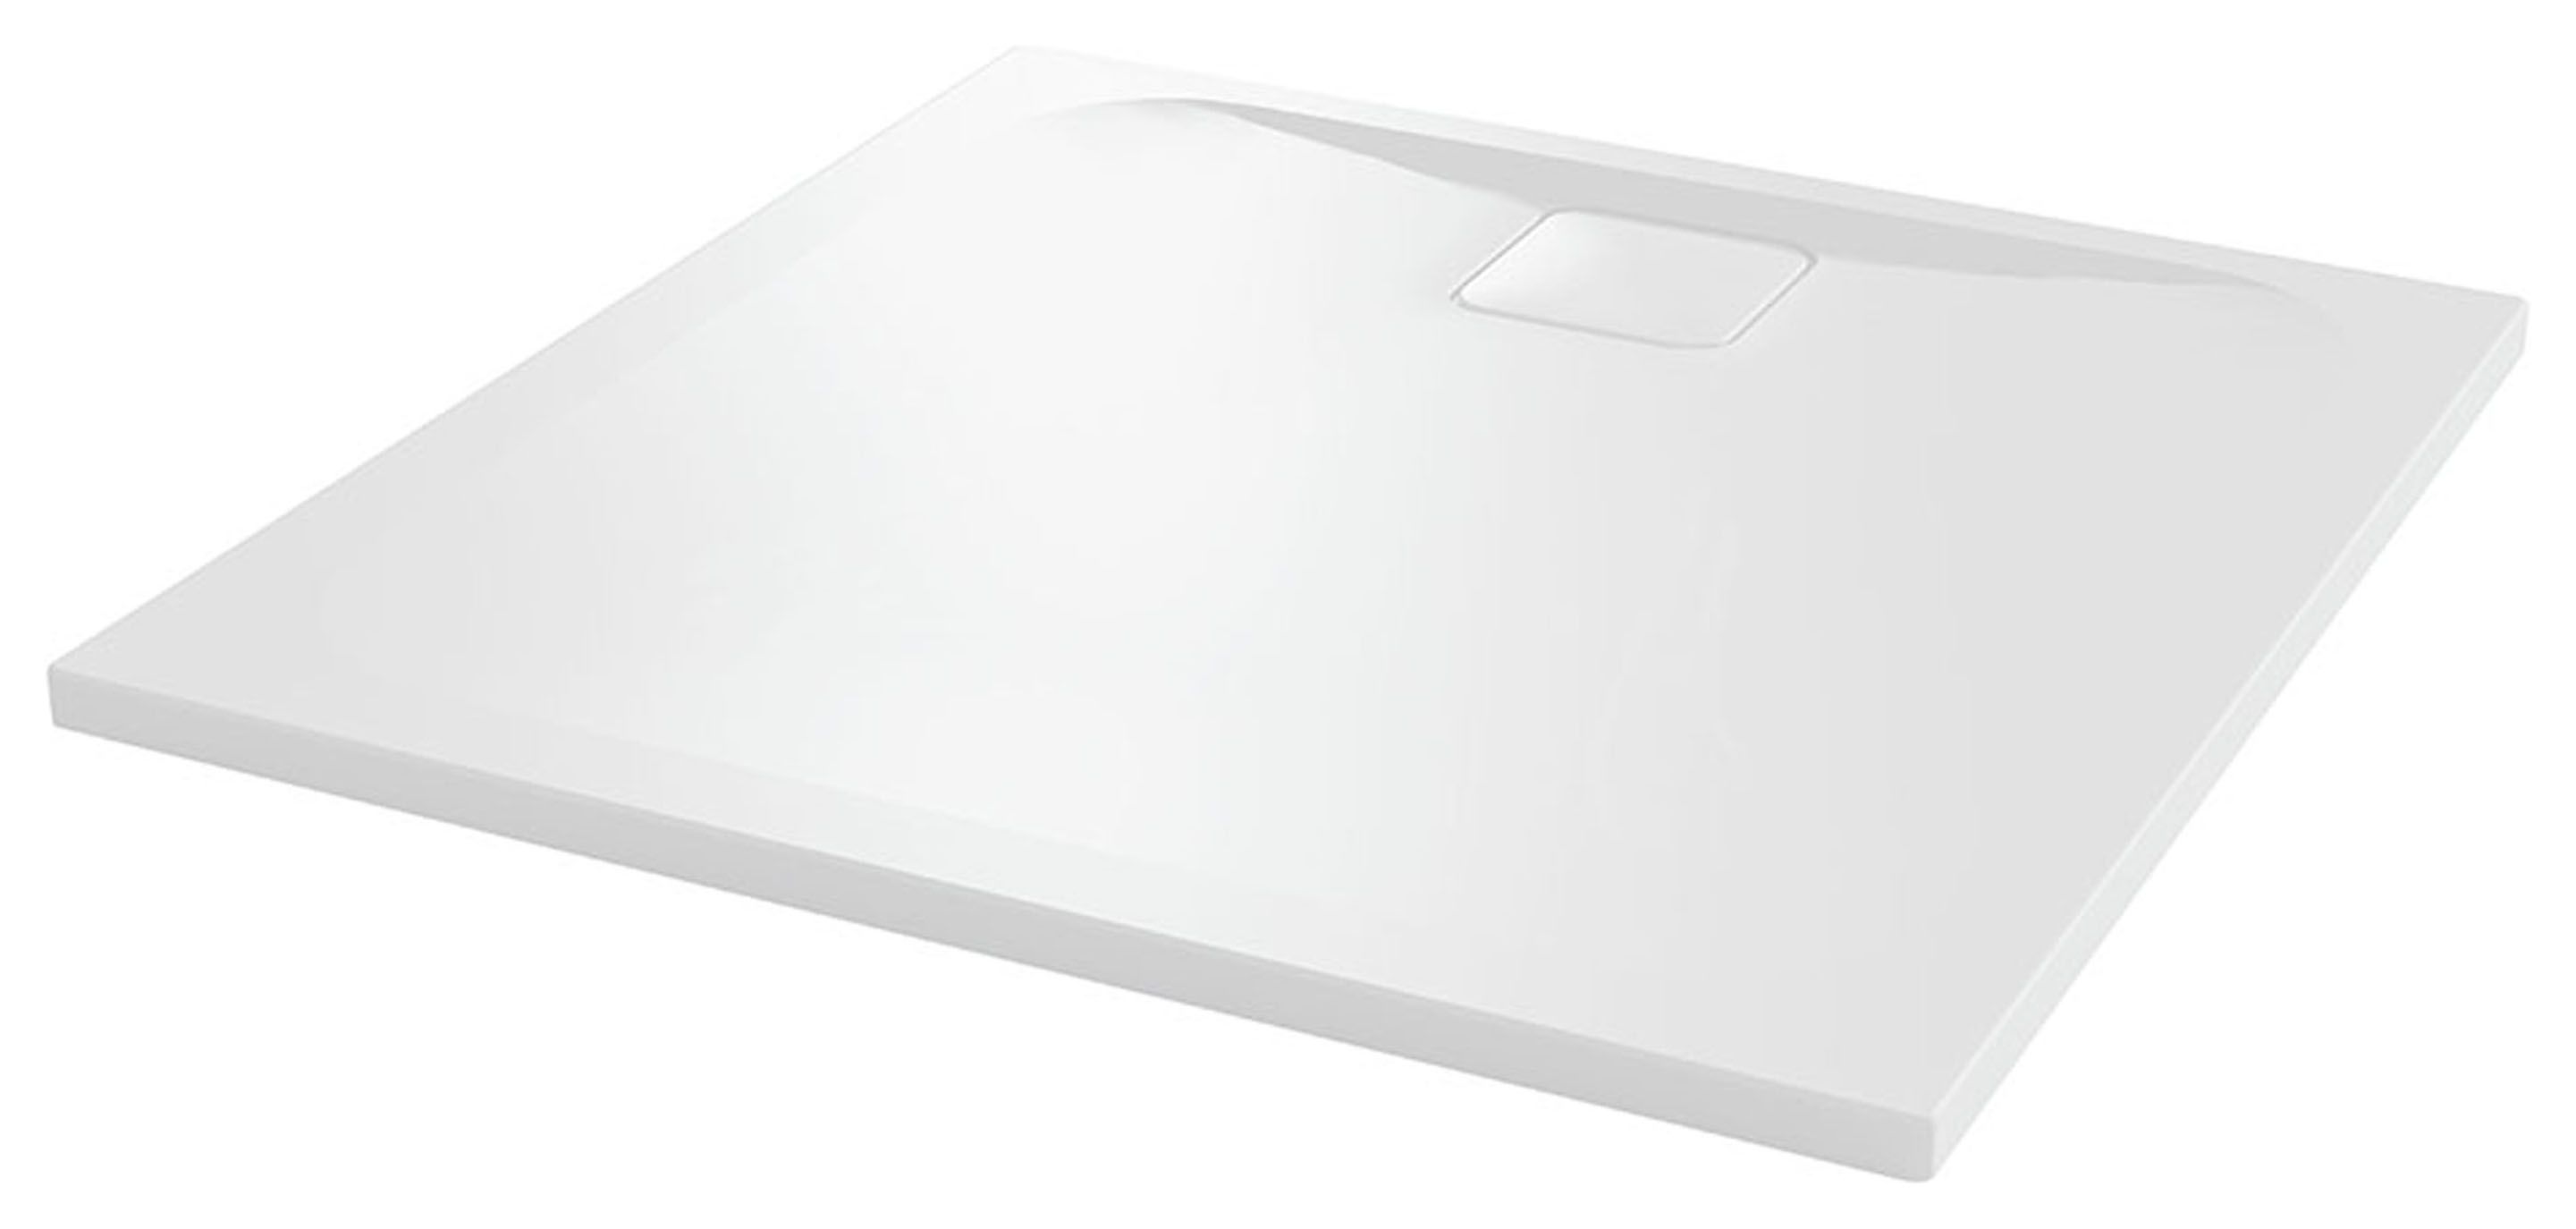 Image of Nexa By Merlyn 25mm Square Low Level White Shower Tray - 900 x 900mm